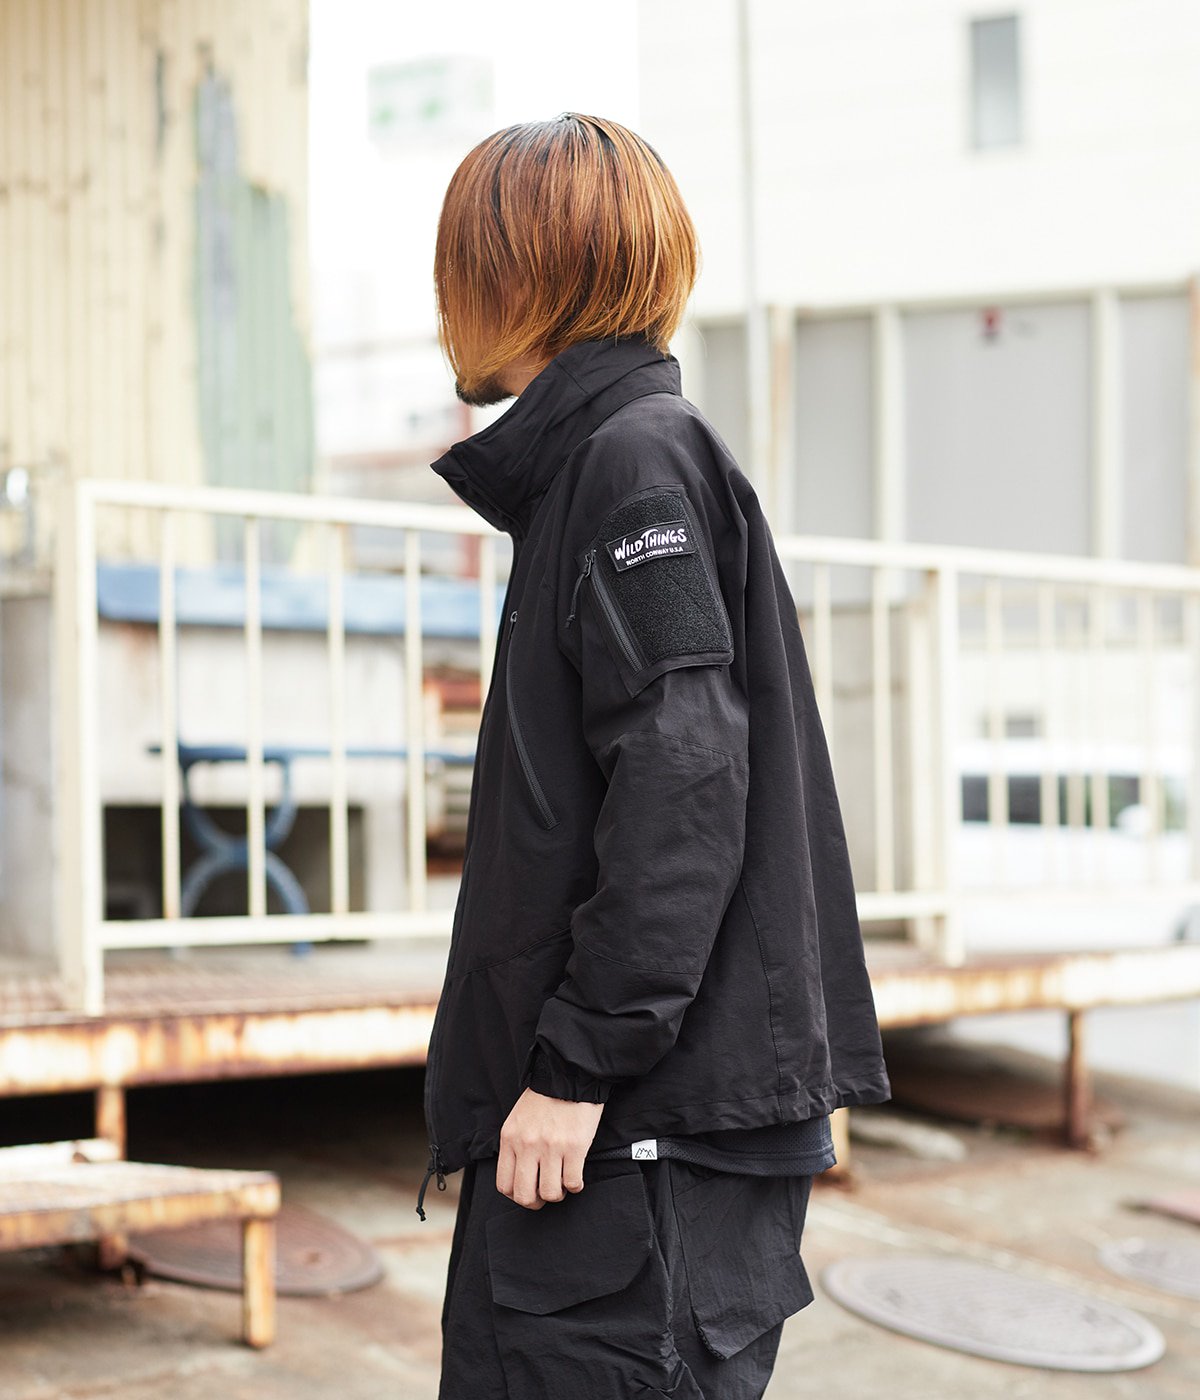 ONLY ARK】別注 LEVEL5 SOFT SHELL JACKET | WILD THINGS(ワイルド ...